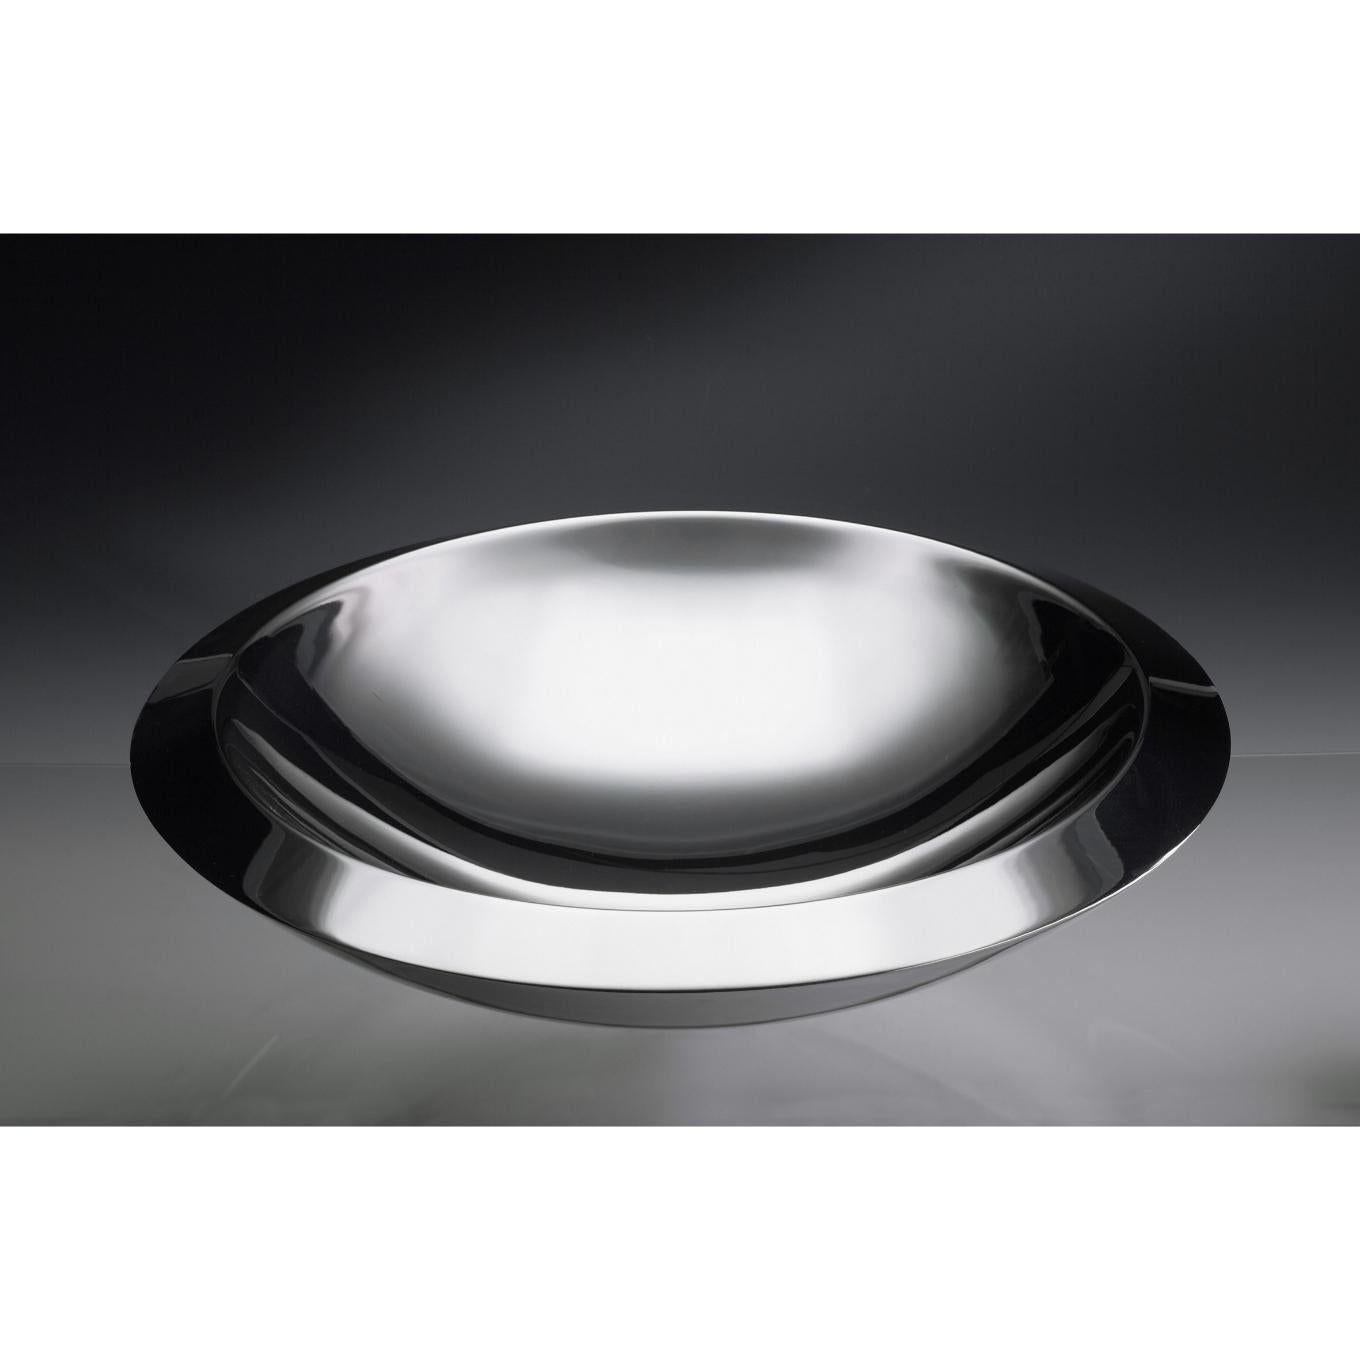 Serving Bowl Caldafreddo
Signed by Leo Aerts.
Dimensions: D 38 x H 9 cm 
Material: Silver 925/1000

Caldafreddo has been designed as a volume, formed by the combination of two moulded sheets that have been welded together. The hollow space in